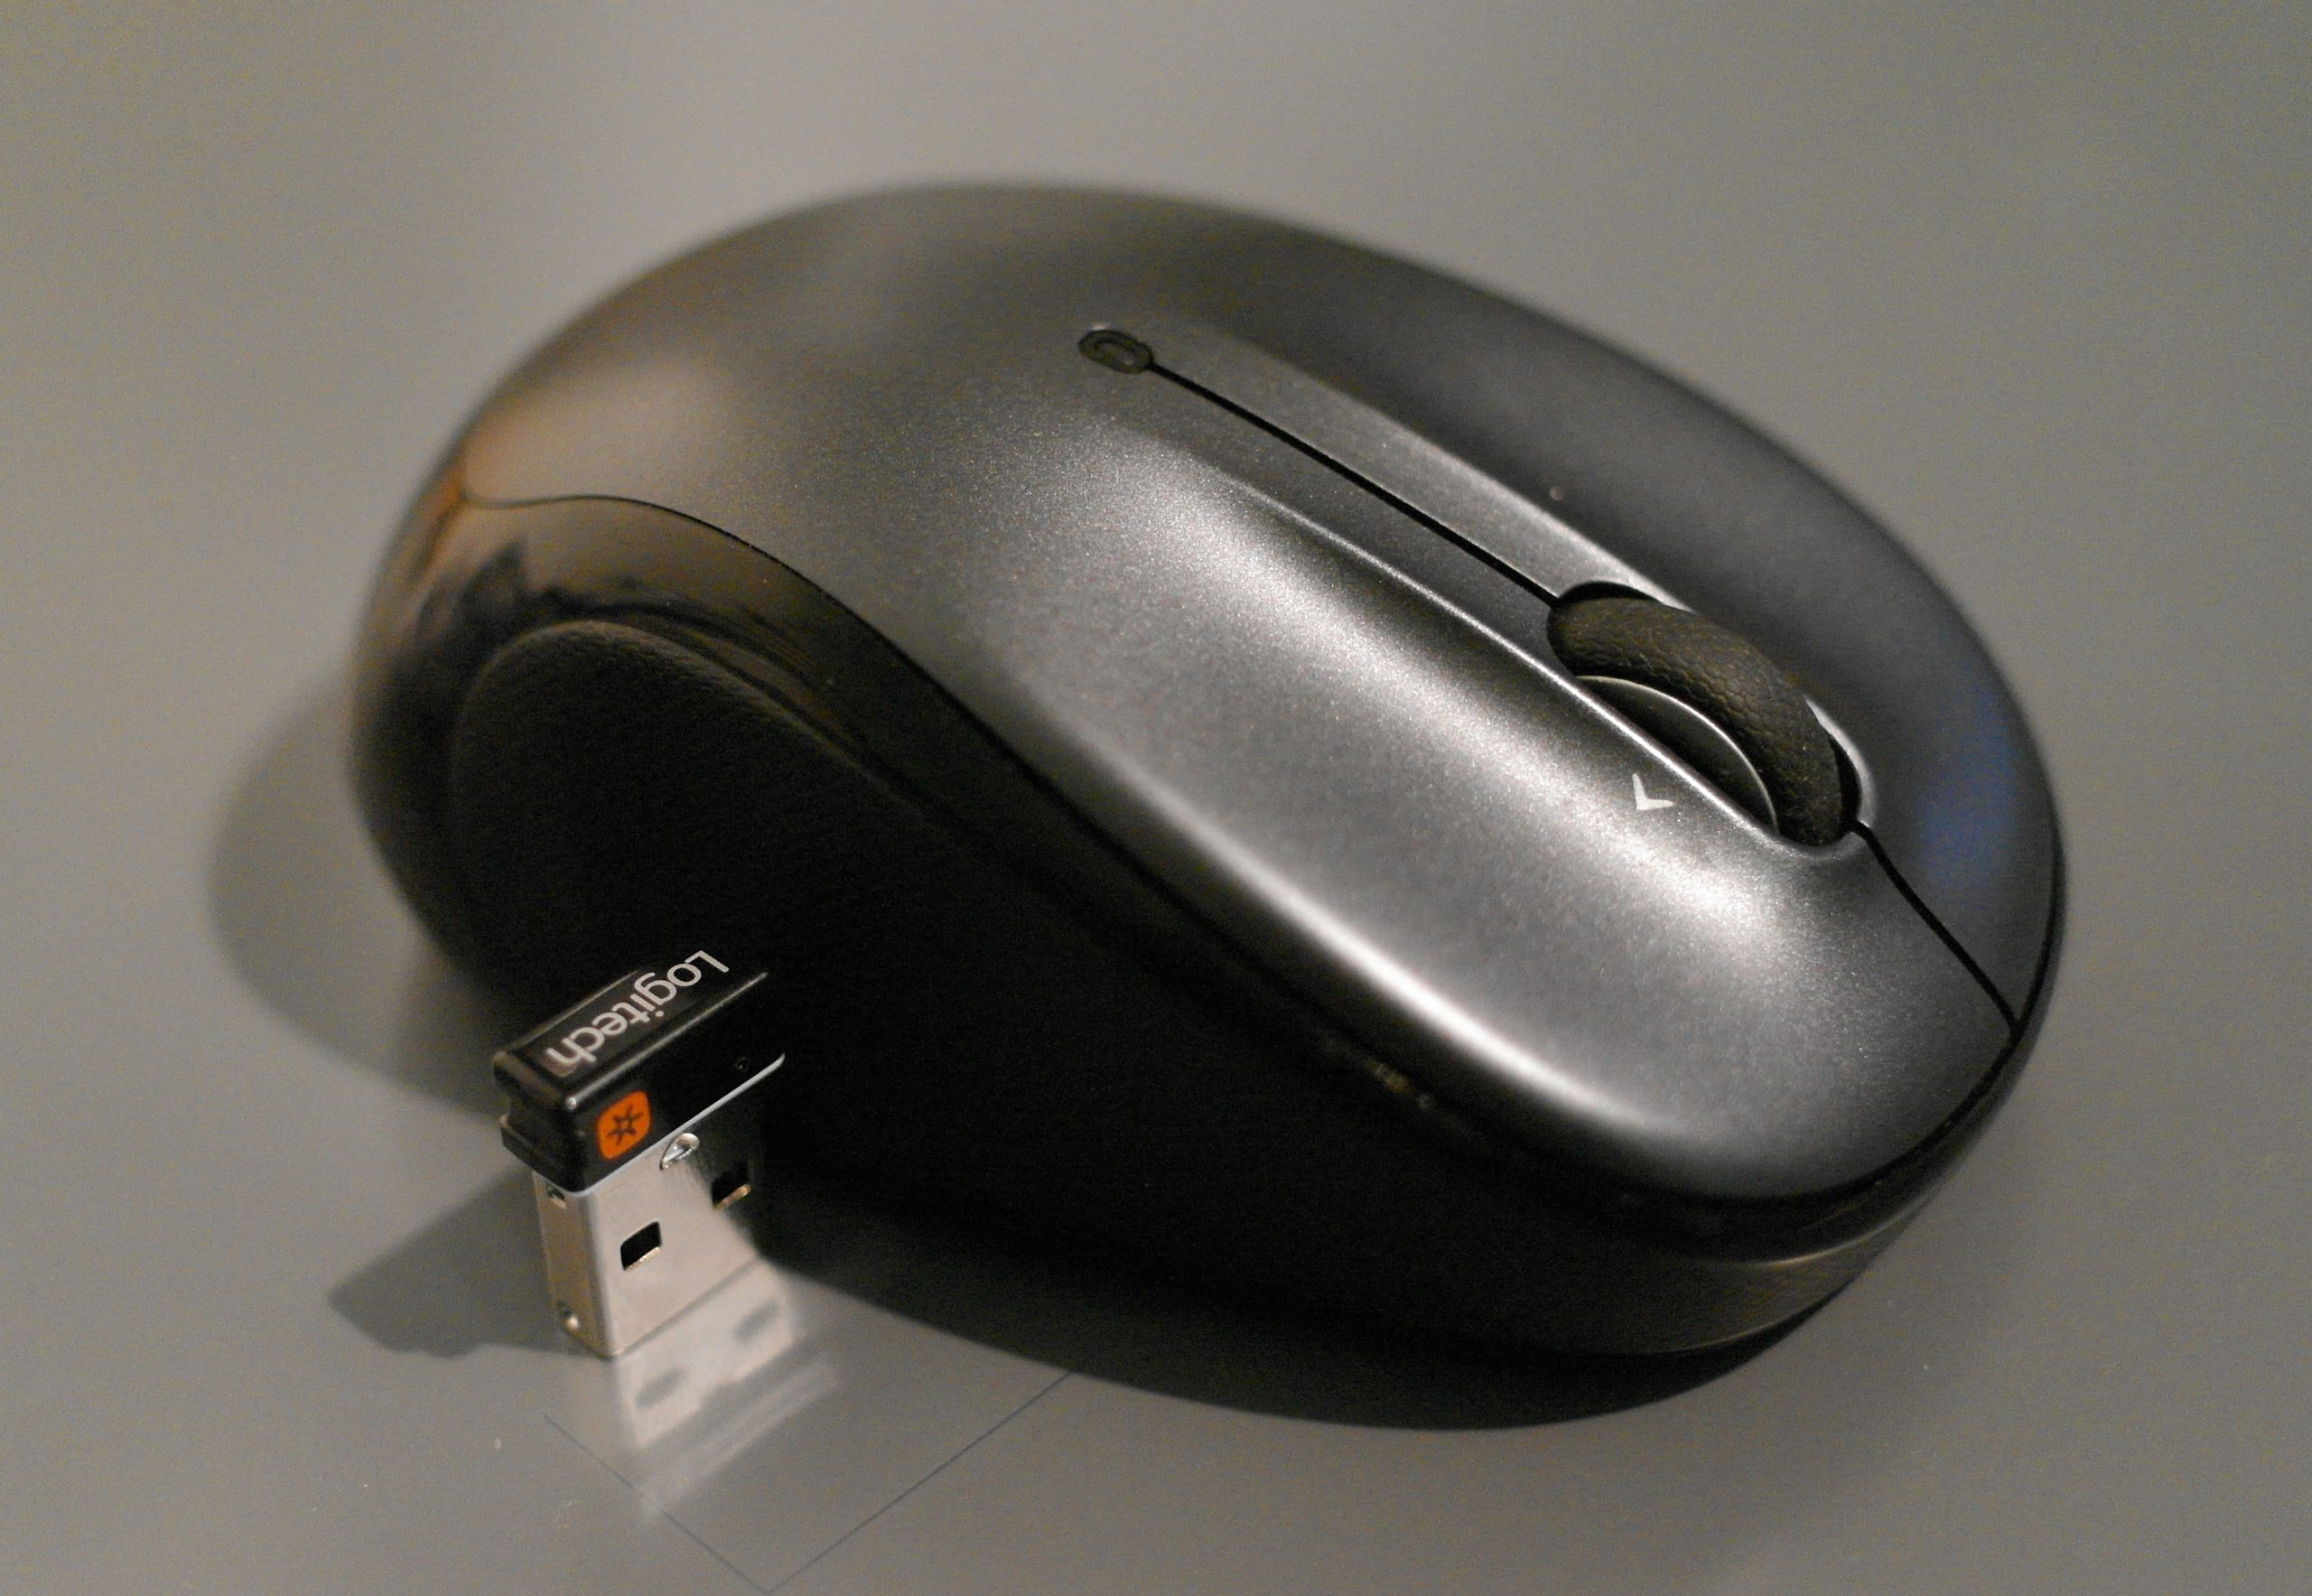 MP følsomhed parfume Logitech M525 vs Logitech M325 Mouse: Which One is Better for the Price?